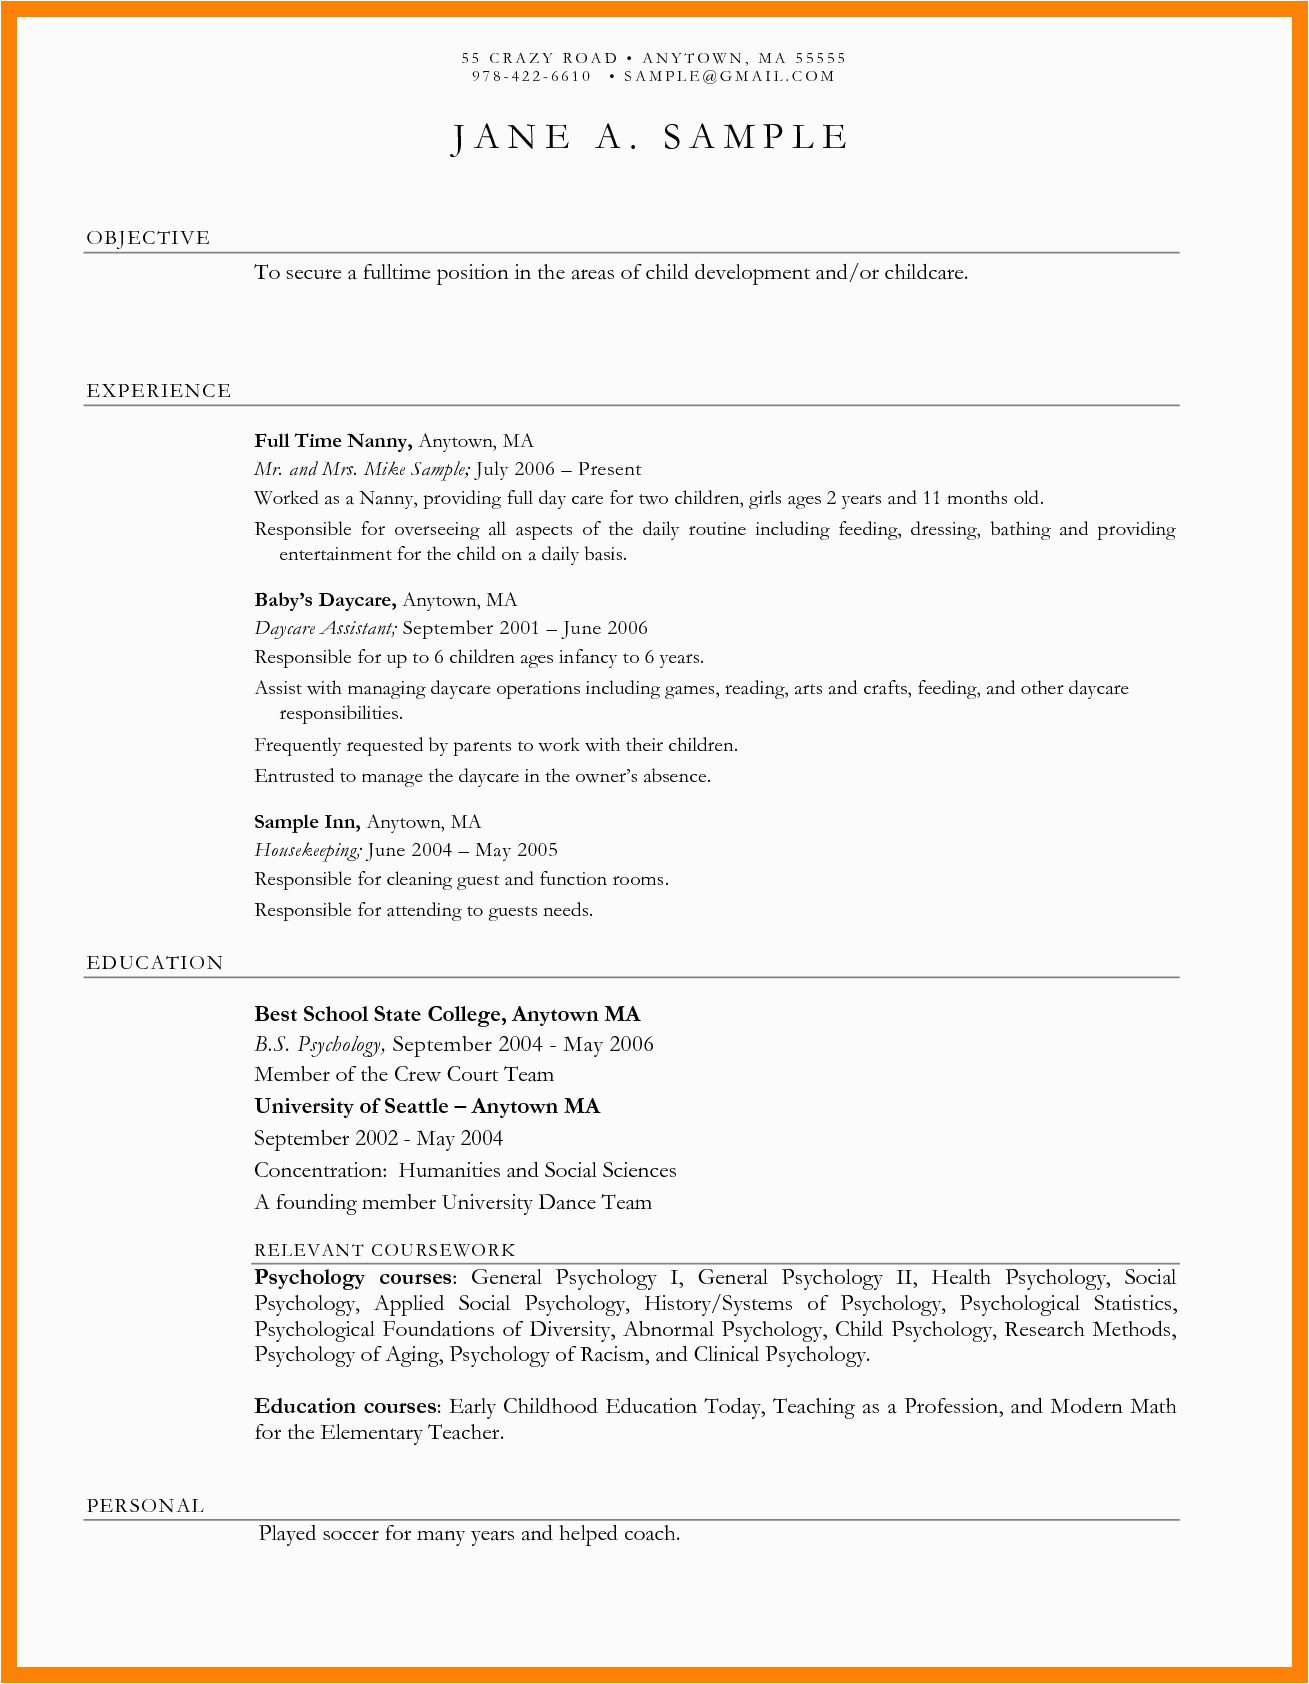 Sample Resume for Daycare Worker with No Experience Cover Letter for Daycare Worker No Experience